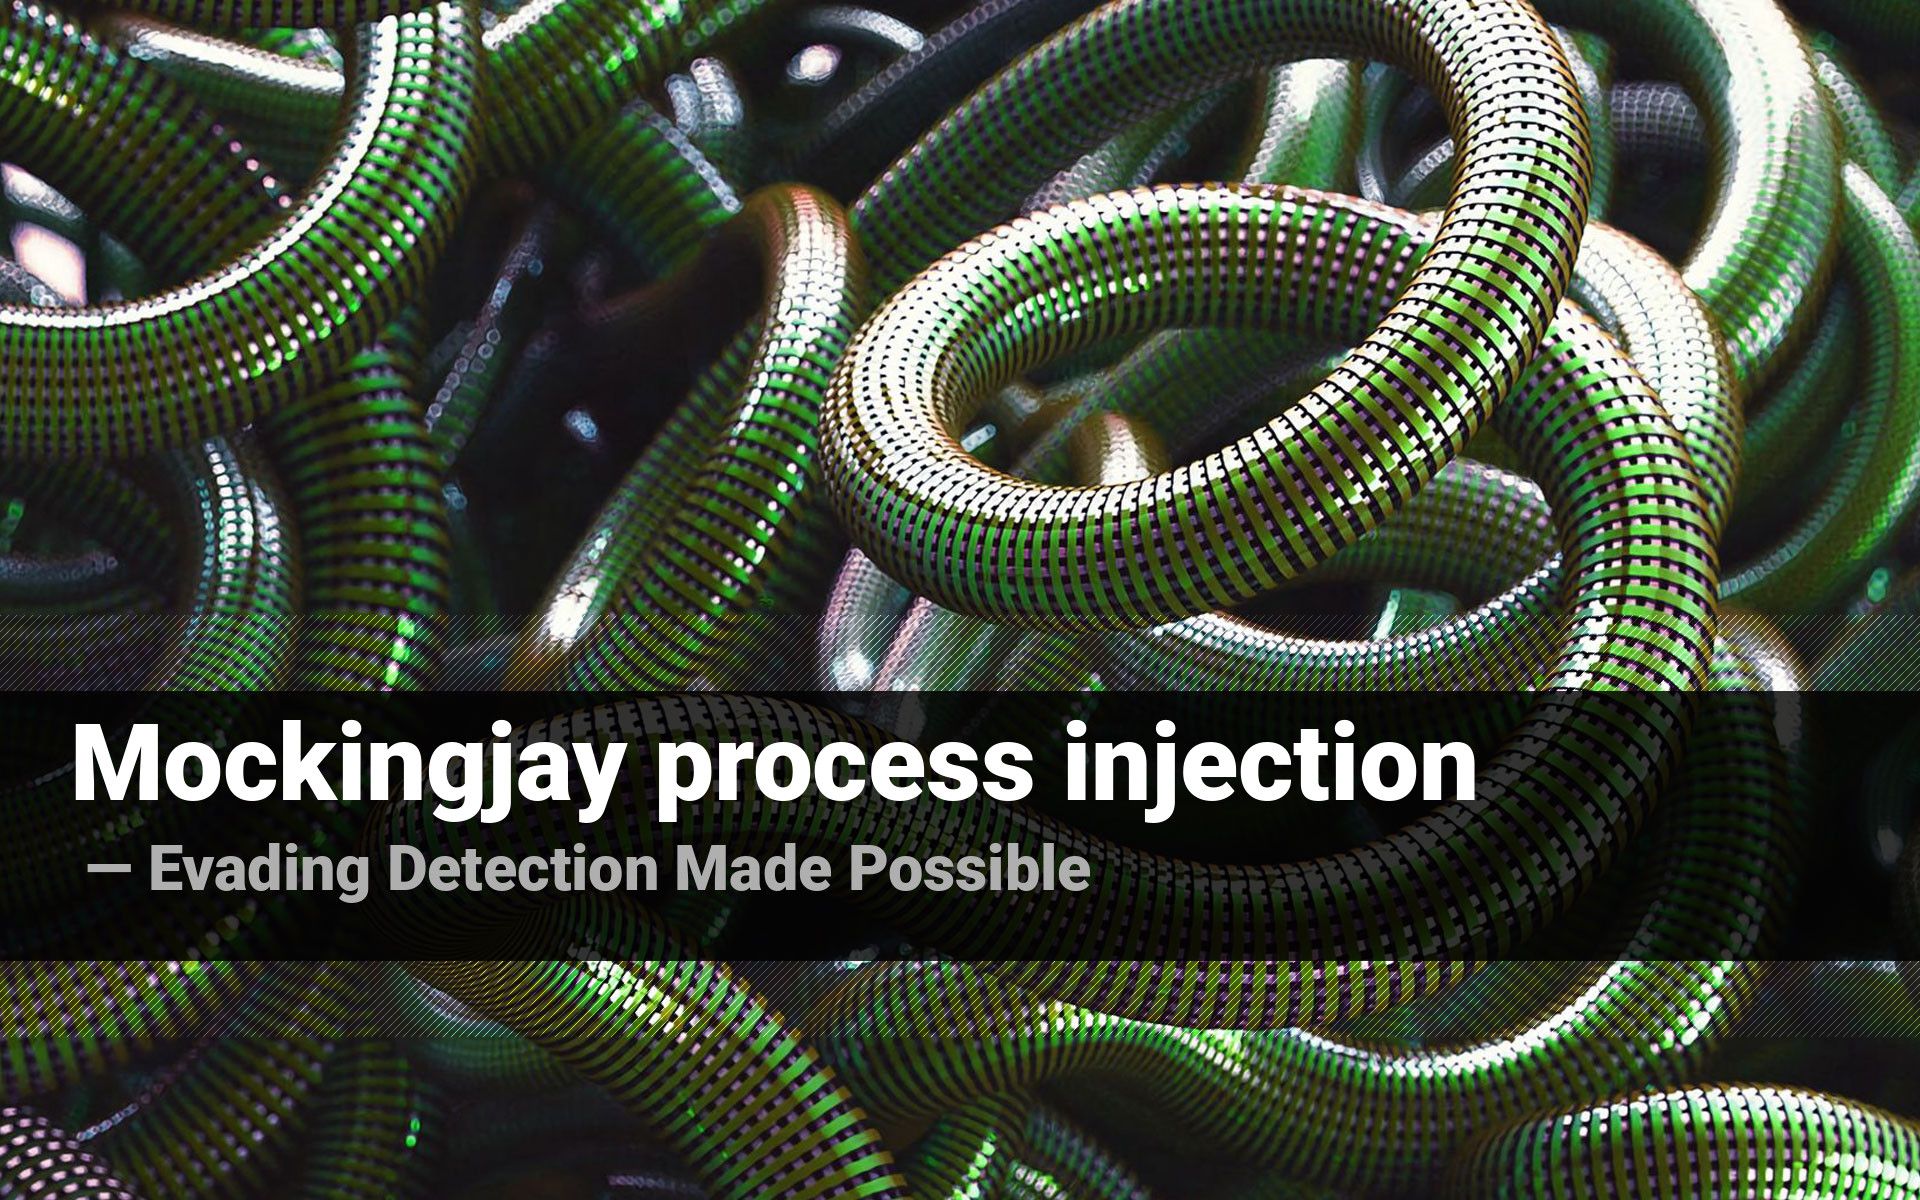 New Mockingjay Process Injection Technique Could Let Malware Evade